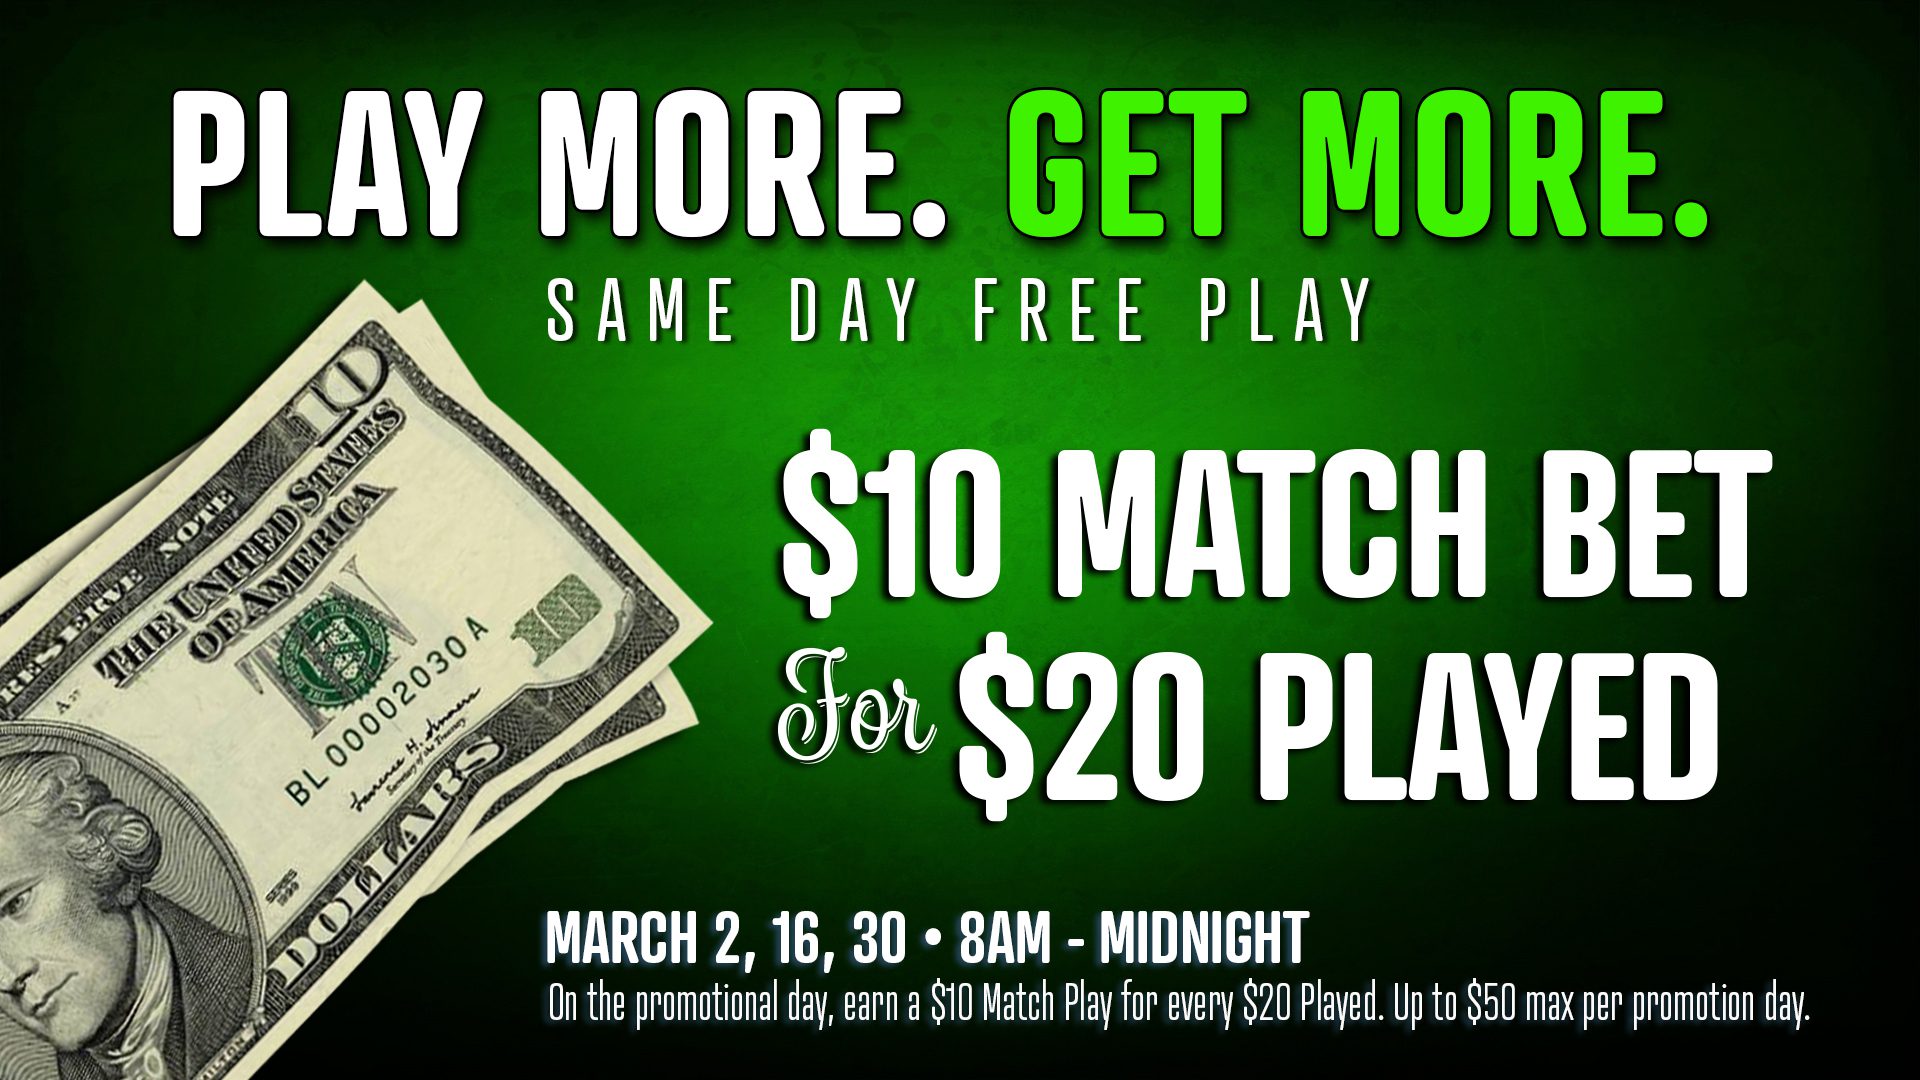 Promotional casino advertisement offering a $10 match bet for every $20 played.